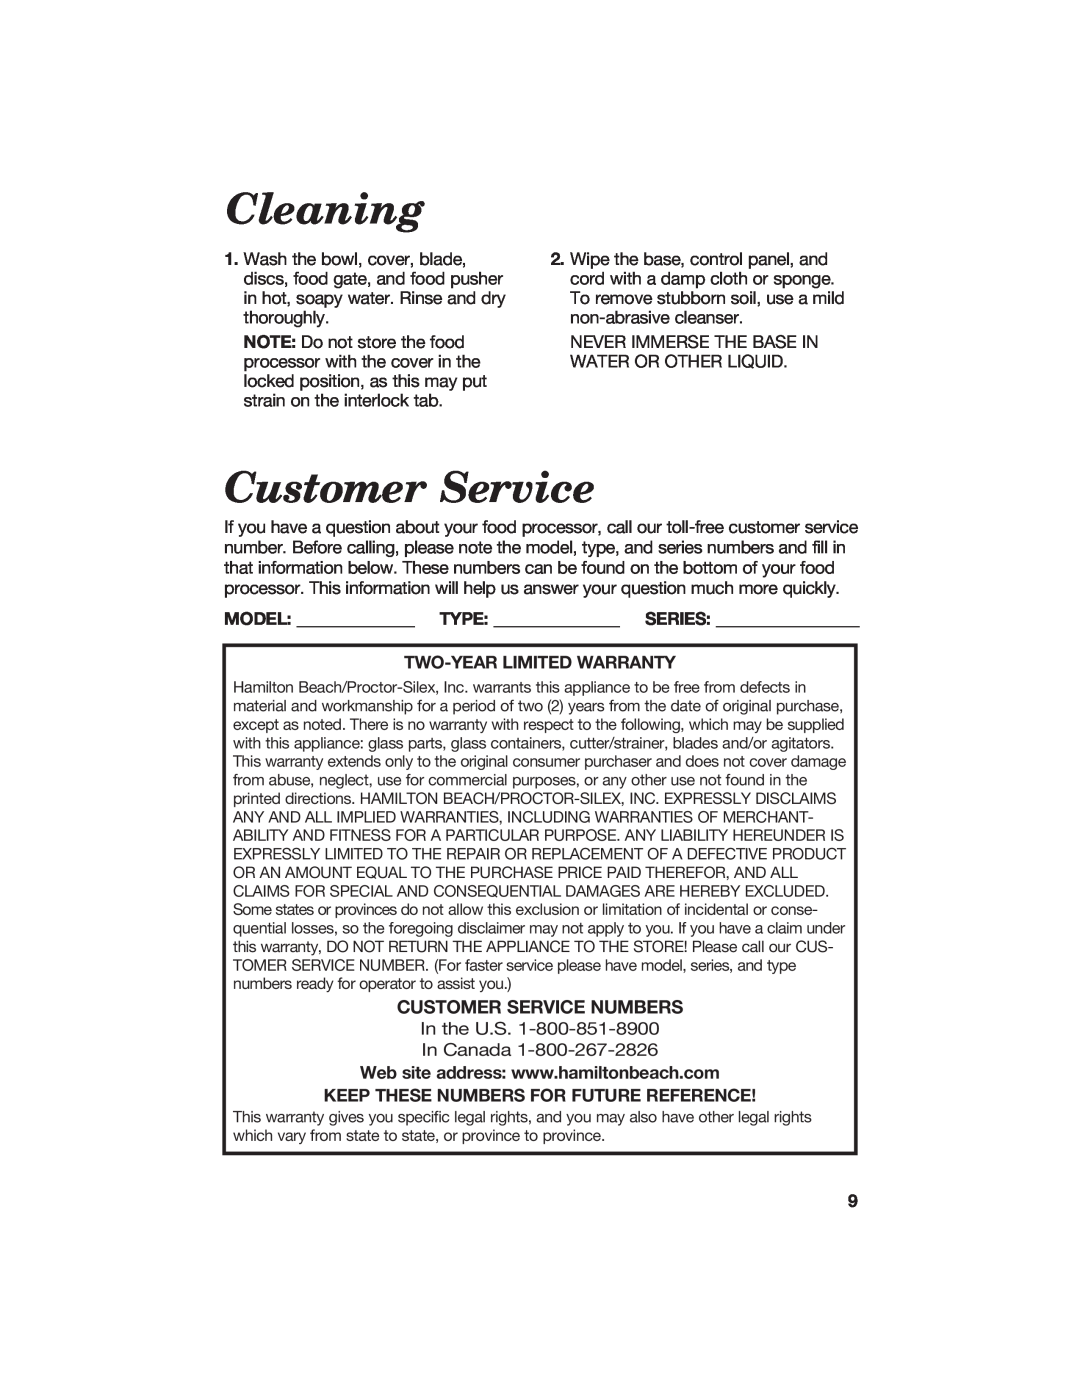 Hamilton Beach 840067400 manual Cleaning, Customer Service Numbers 